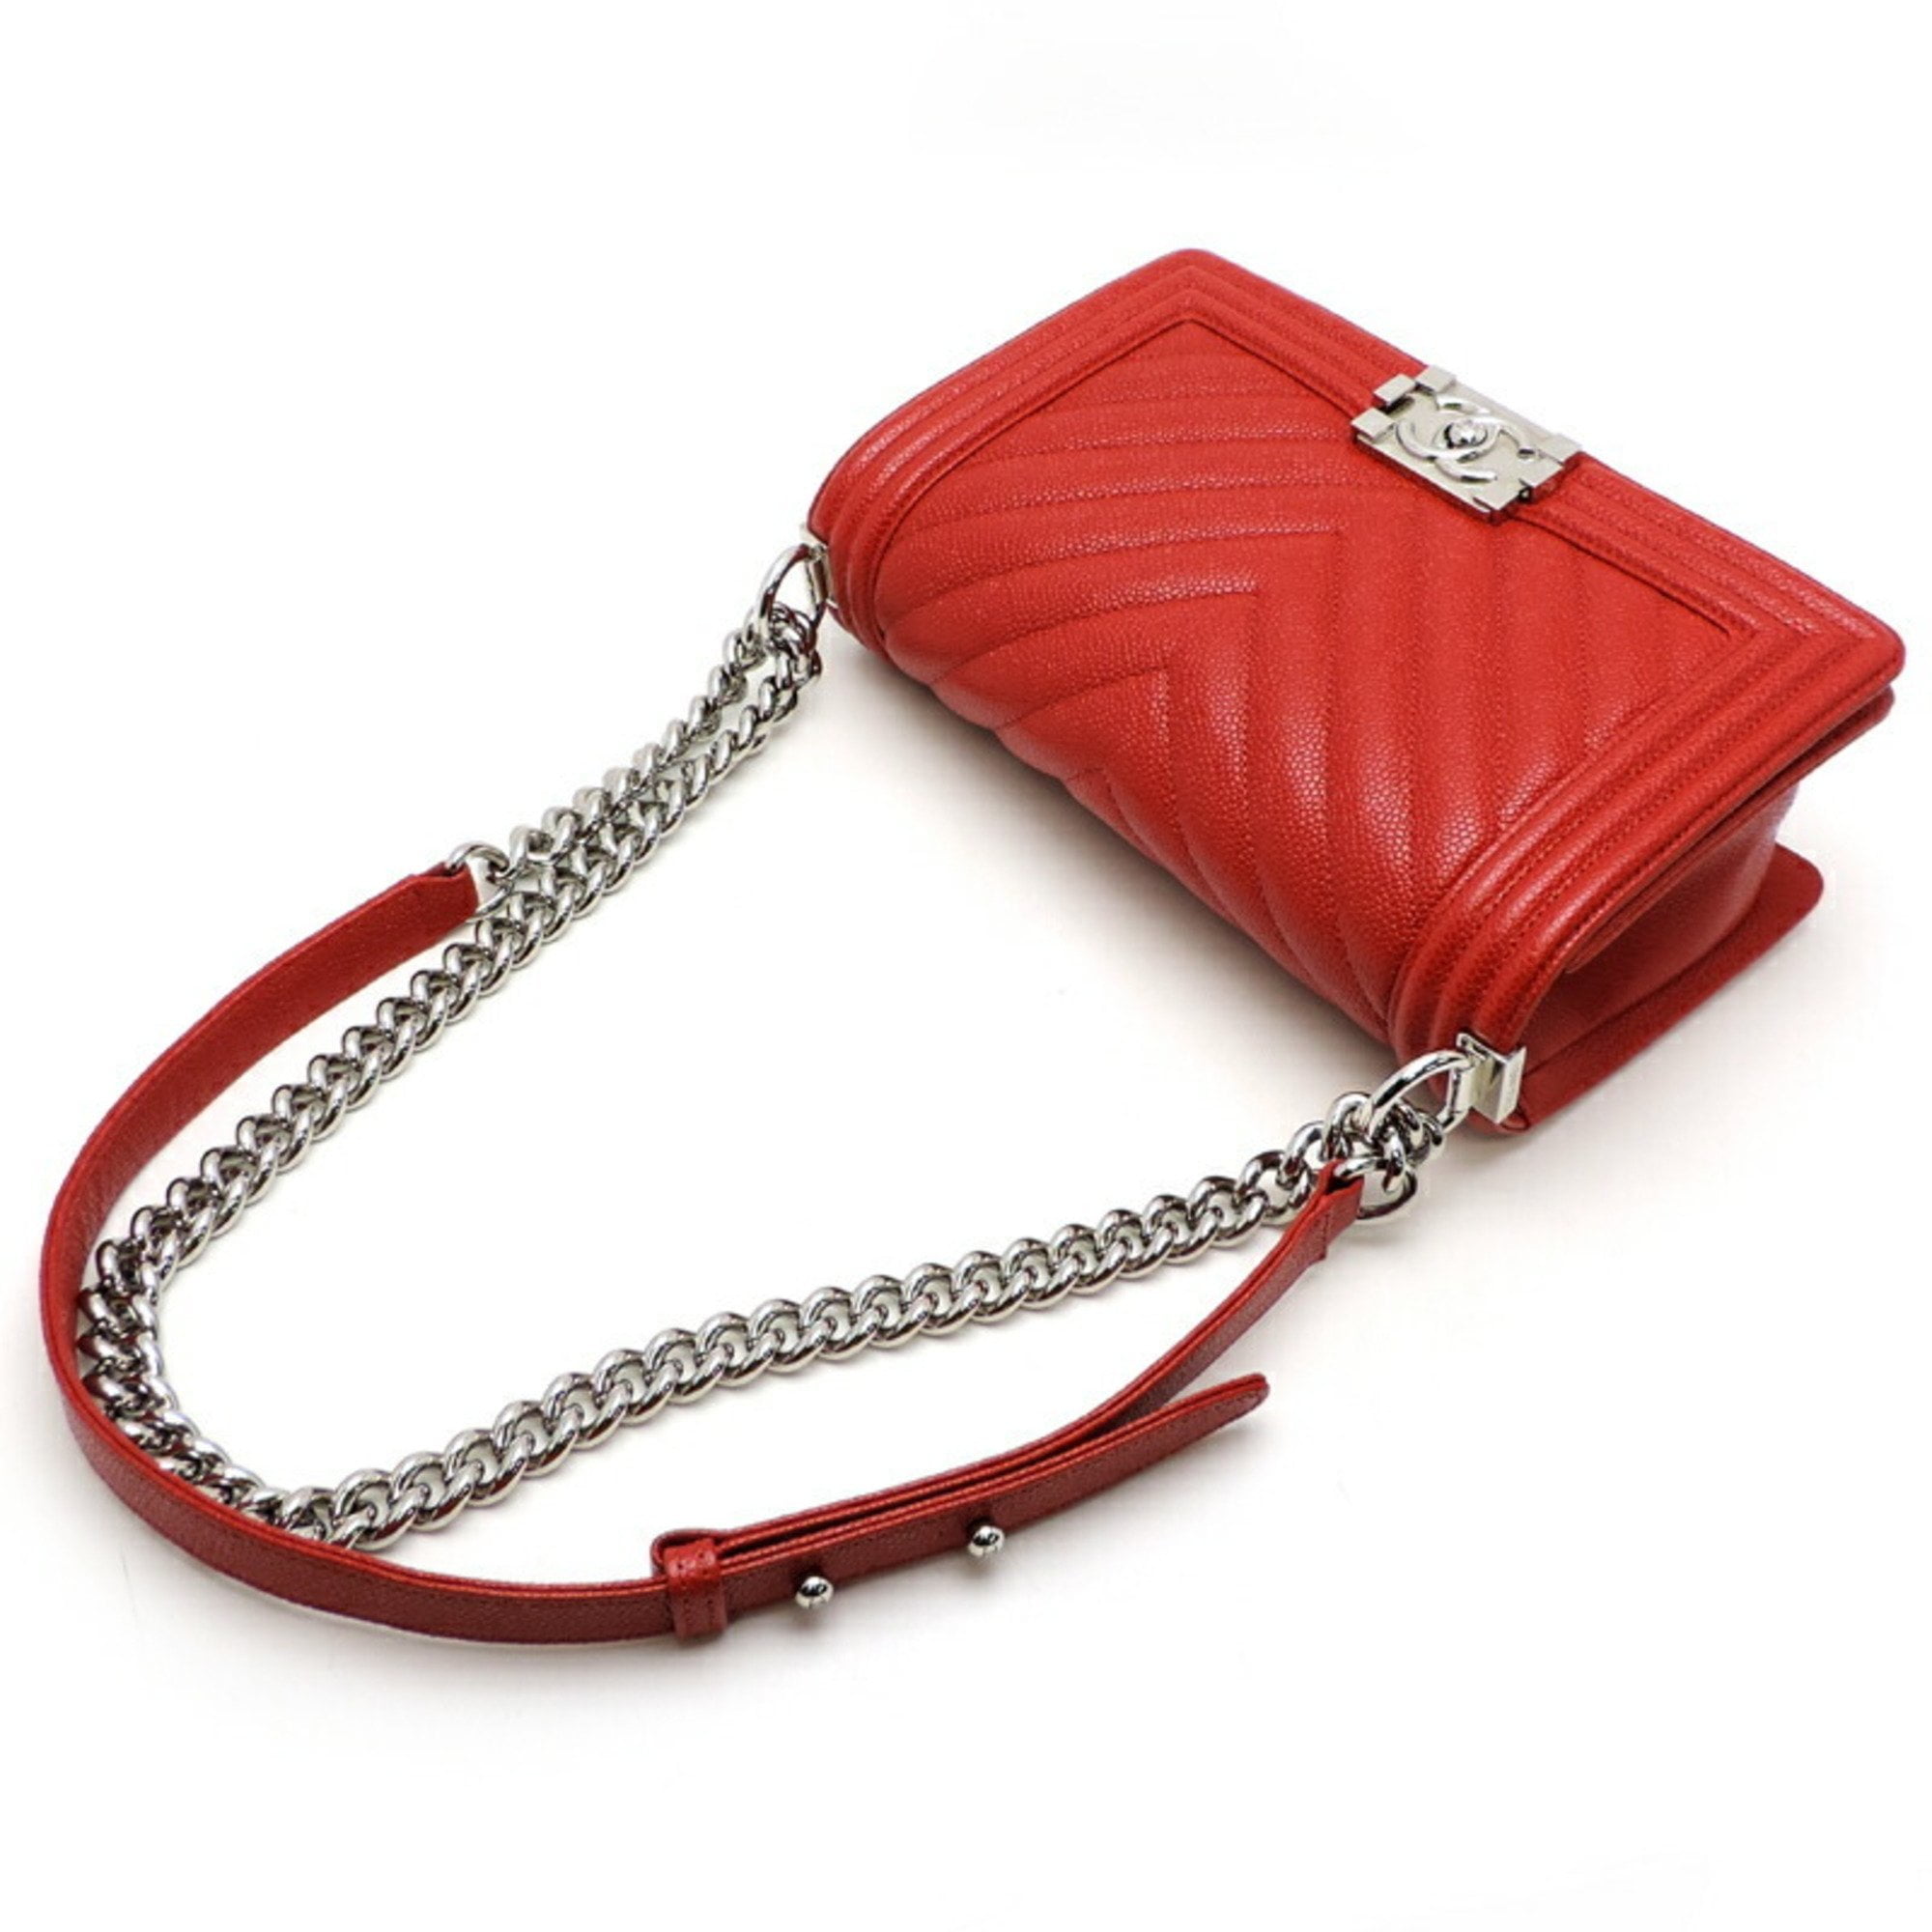 Authenticated Used Chanel Boy V Stitch Chain Shoulder Women's Bag A67086  Caviar Skin Red 